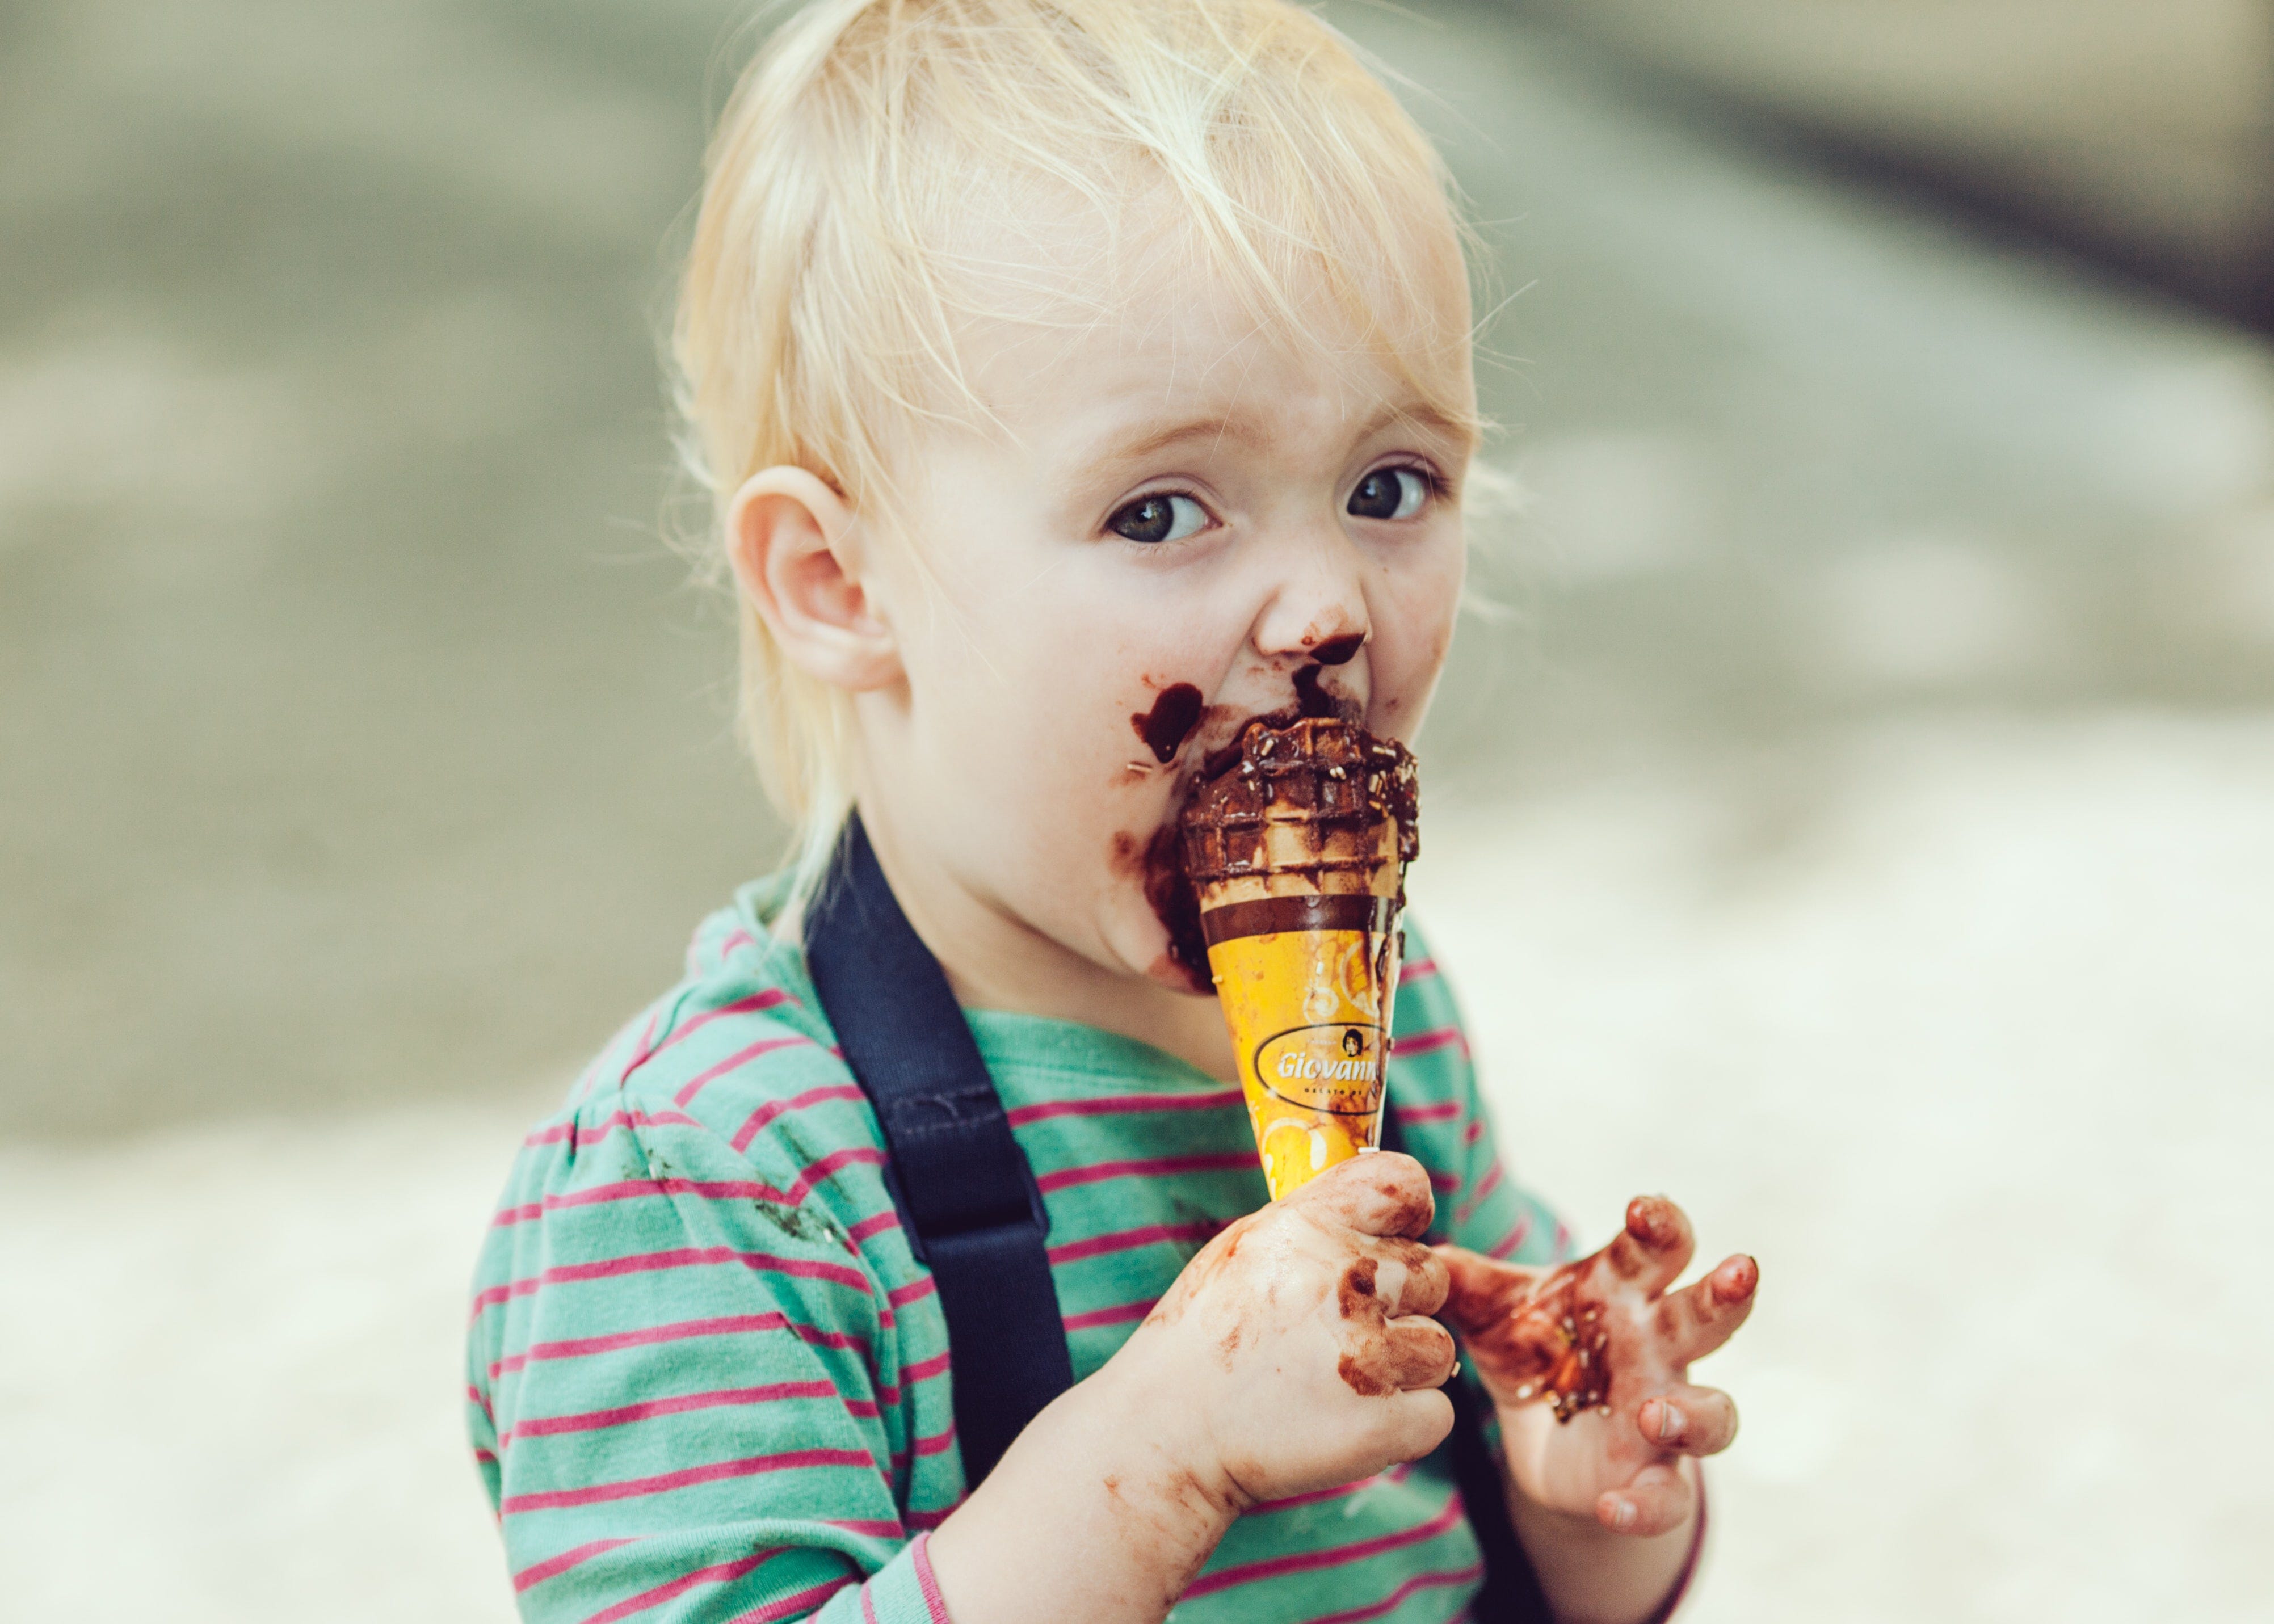 A young child outdoors eating chocolate icecream, with chocolate covering their face and hands